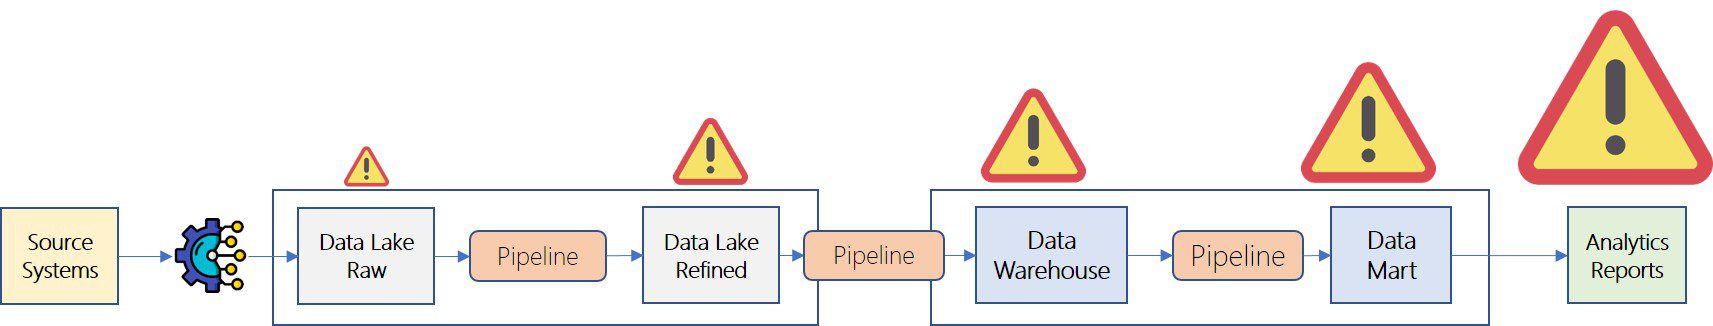 Errors get amplified as it flows through the data pipeline